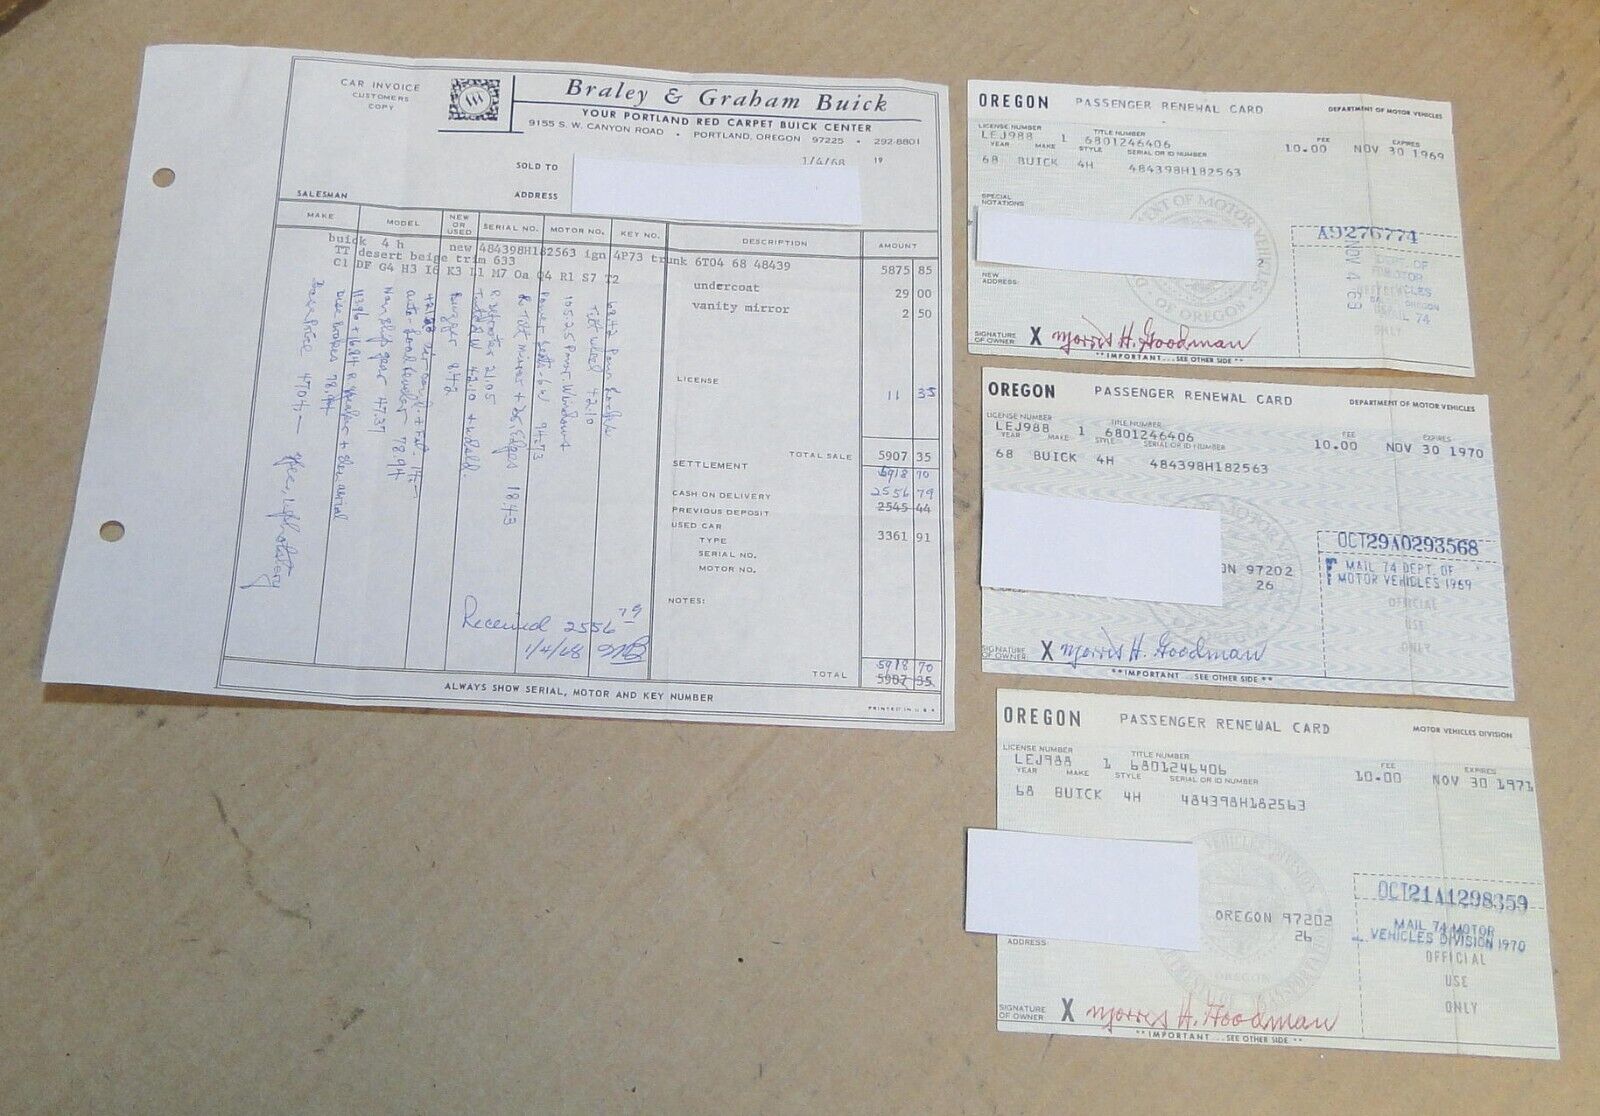 Braley & Graham Buick Receipt for a New 1968 Buick + Registration Cards